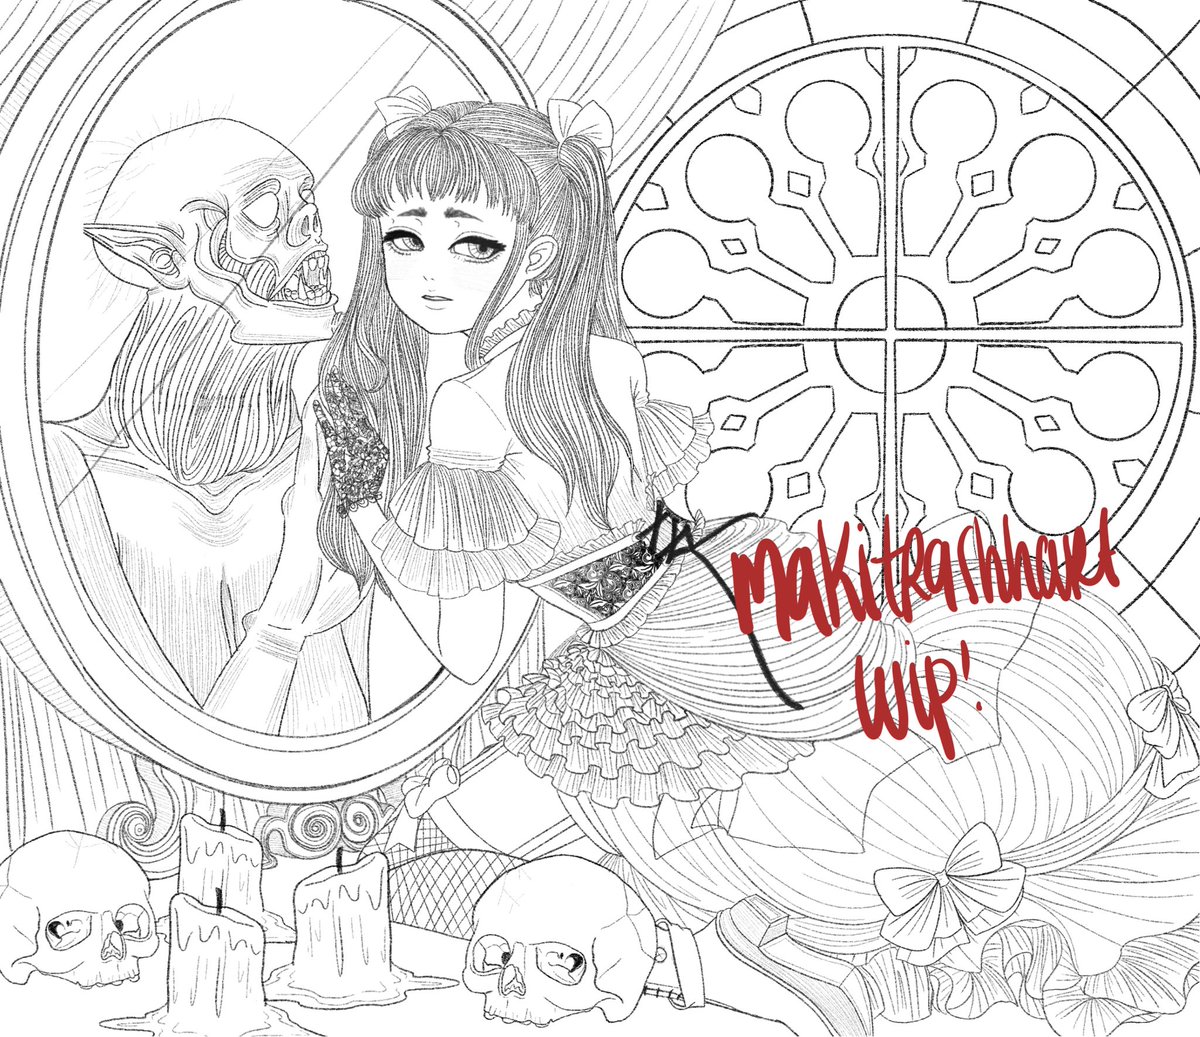 My hand is dead but at least my lineart is finished lol #wip 